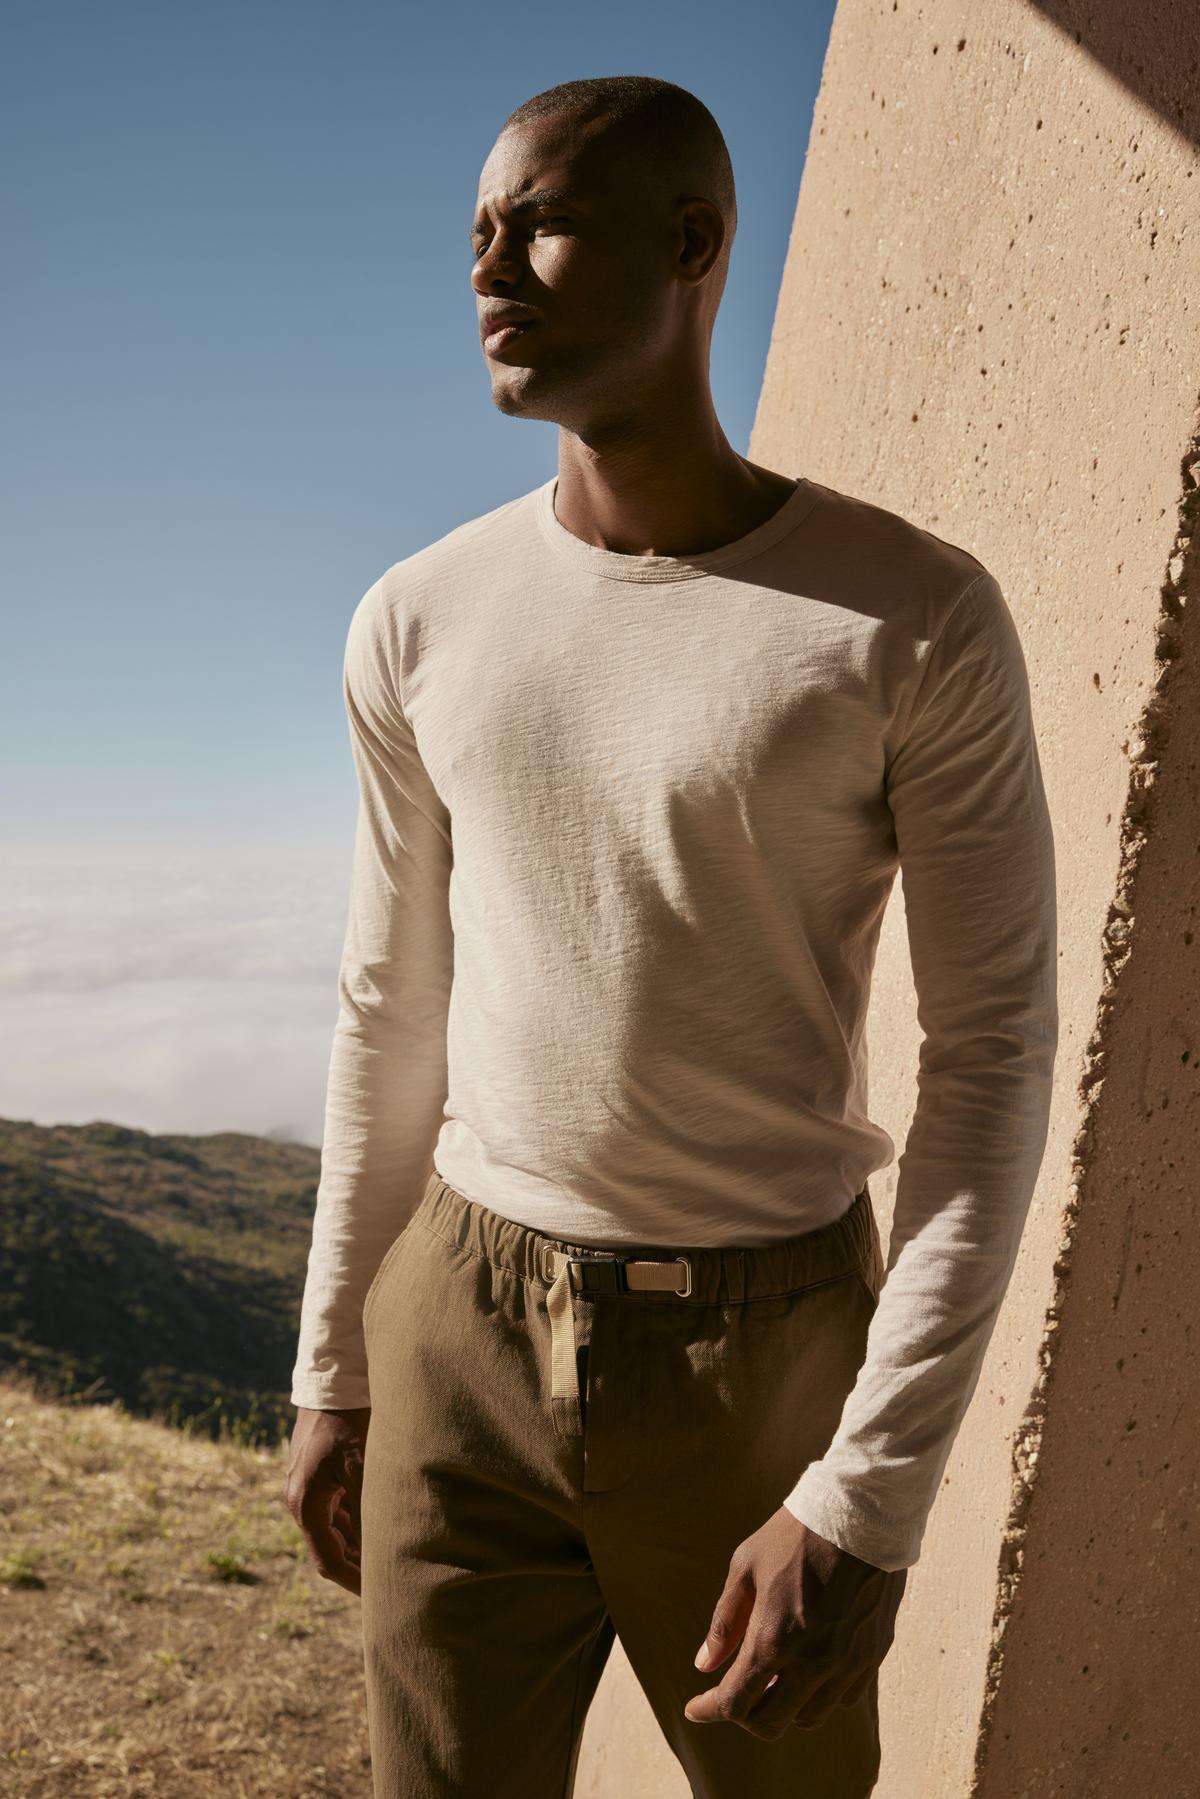 A man in a white KAI CREW NECK TEE by Velvet by Graham & Spencer and khaki pants is standing in front of a mountain.-35547537932481